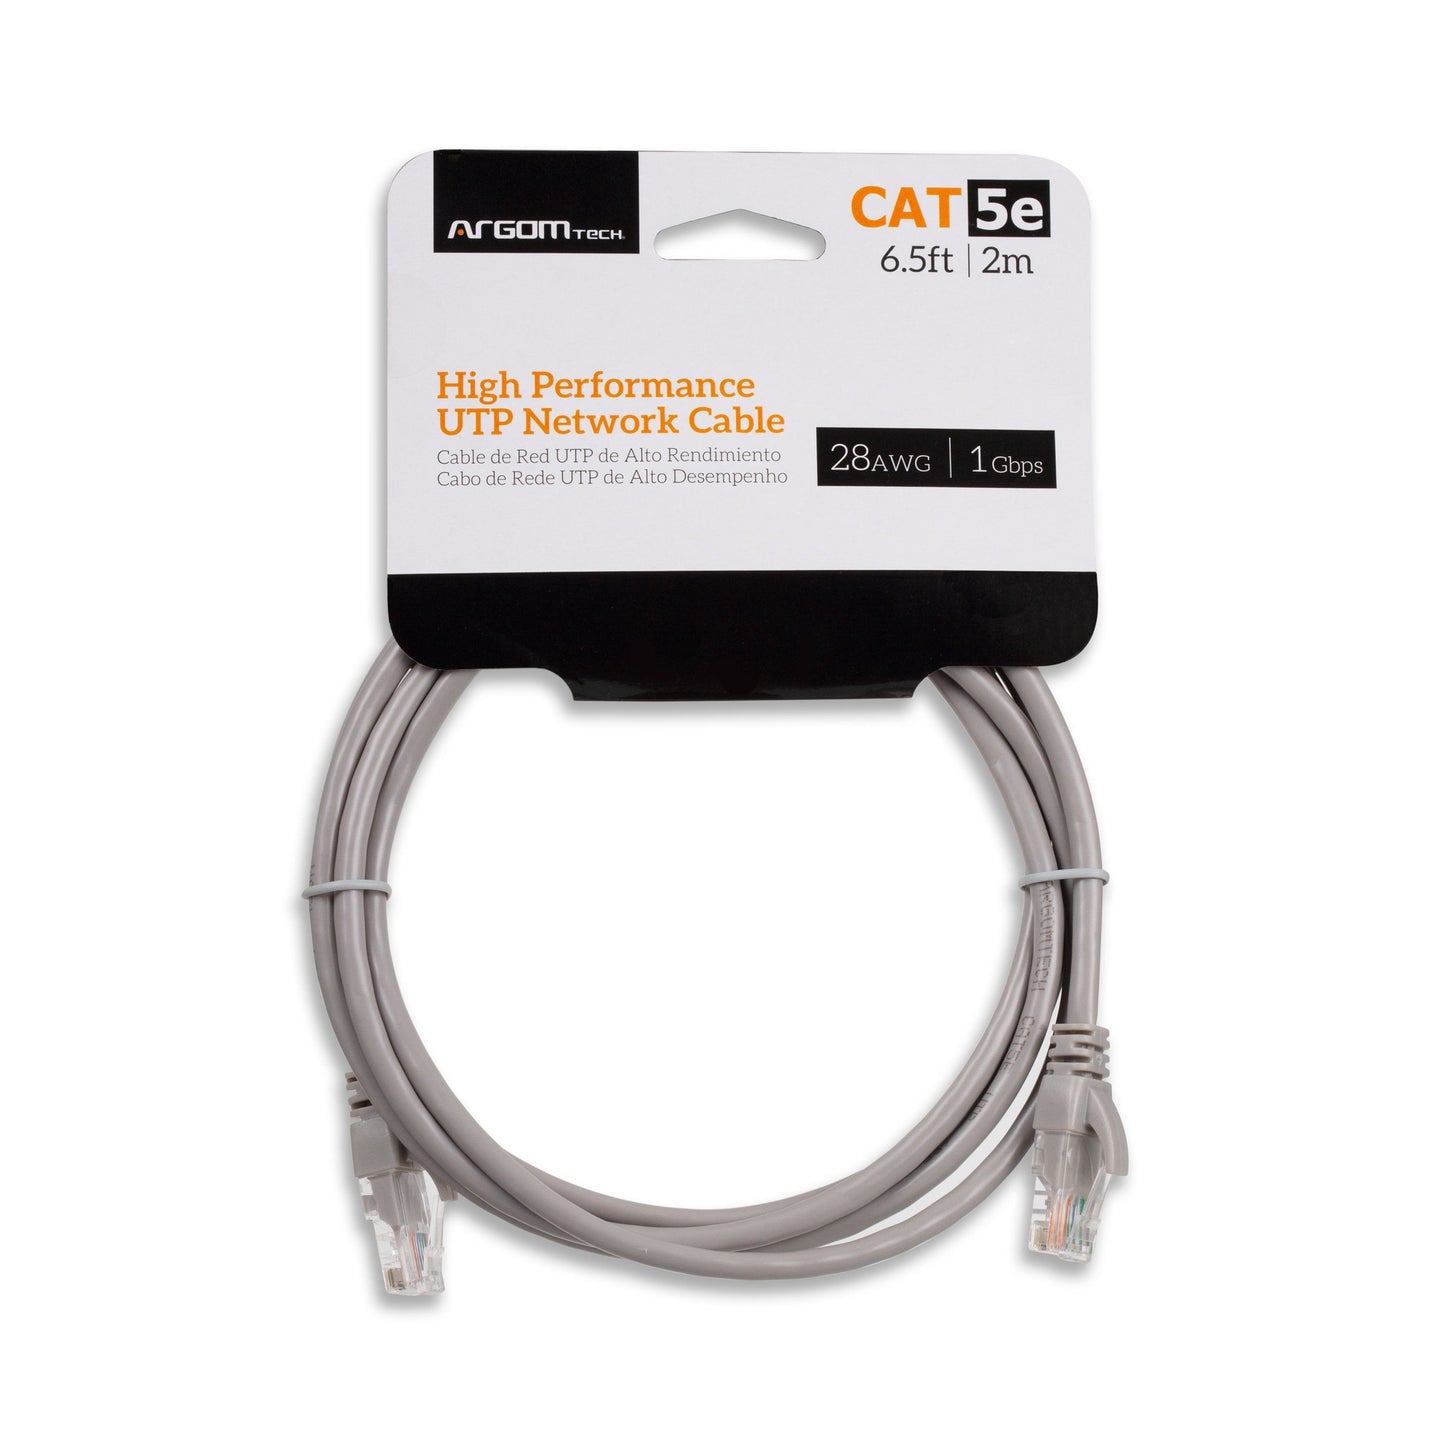 CABLE NETWORK UTP CAT5E 6.5FT2M